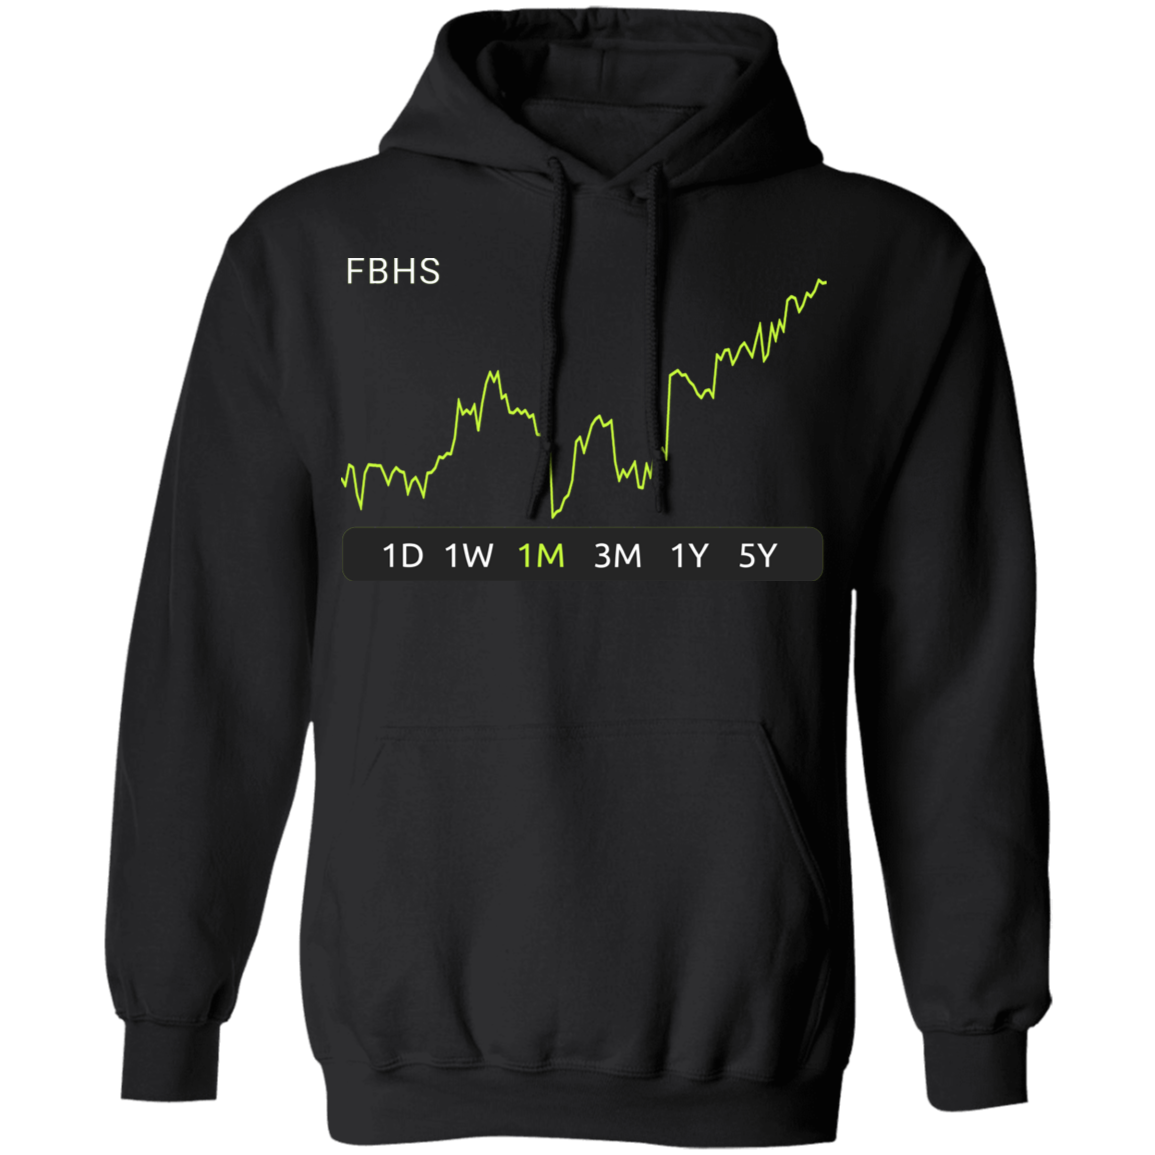 FBHS Stock 1m Pullover Hoodie